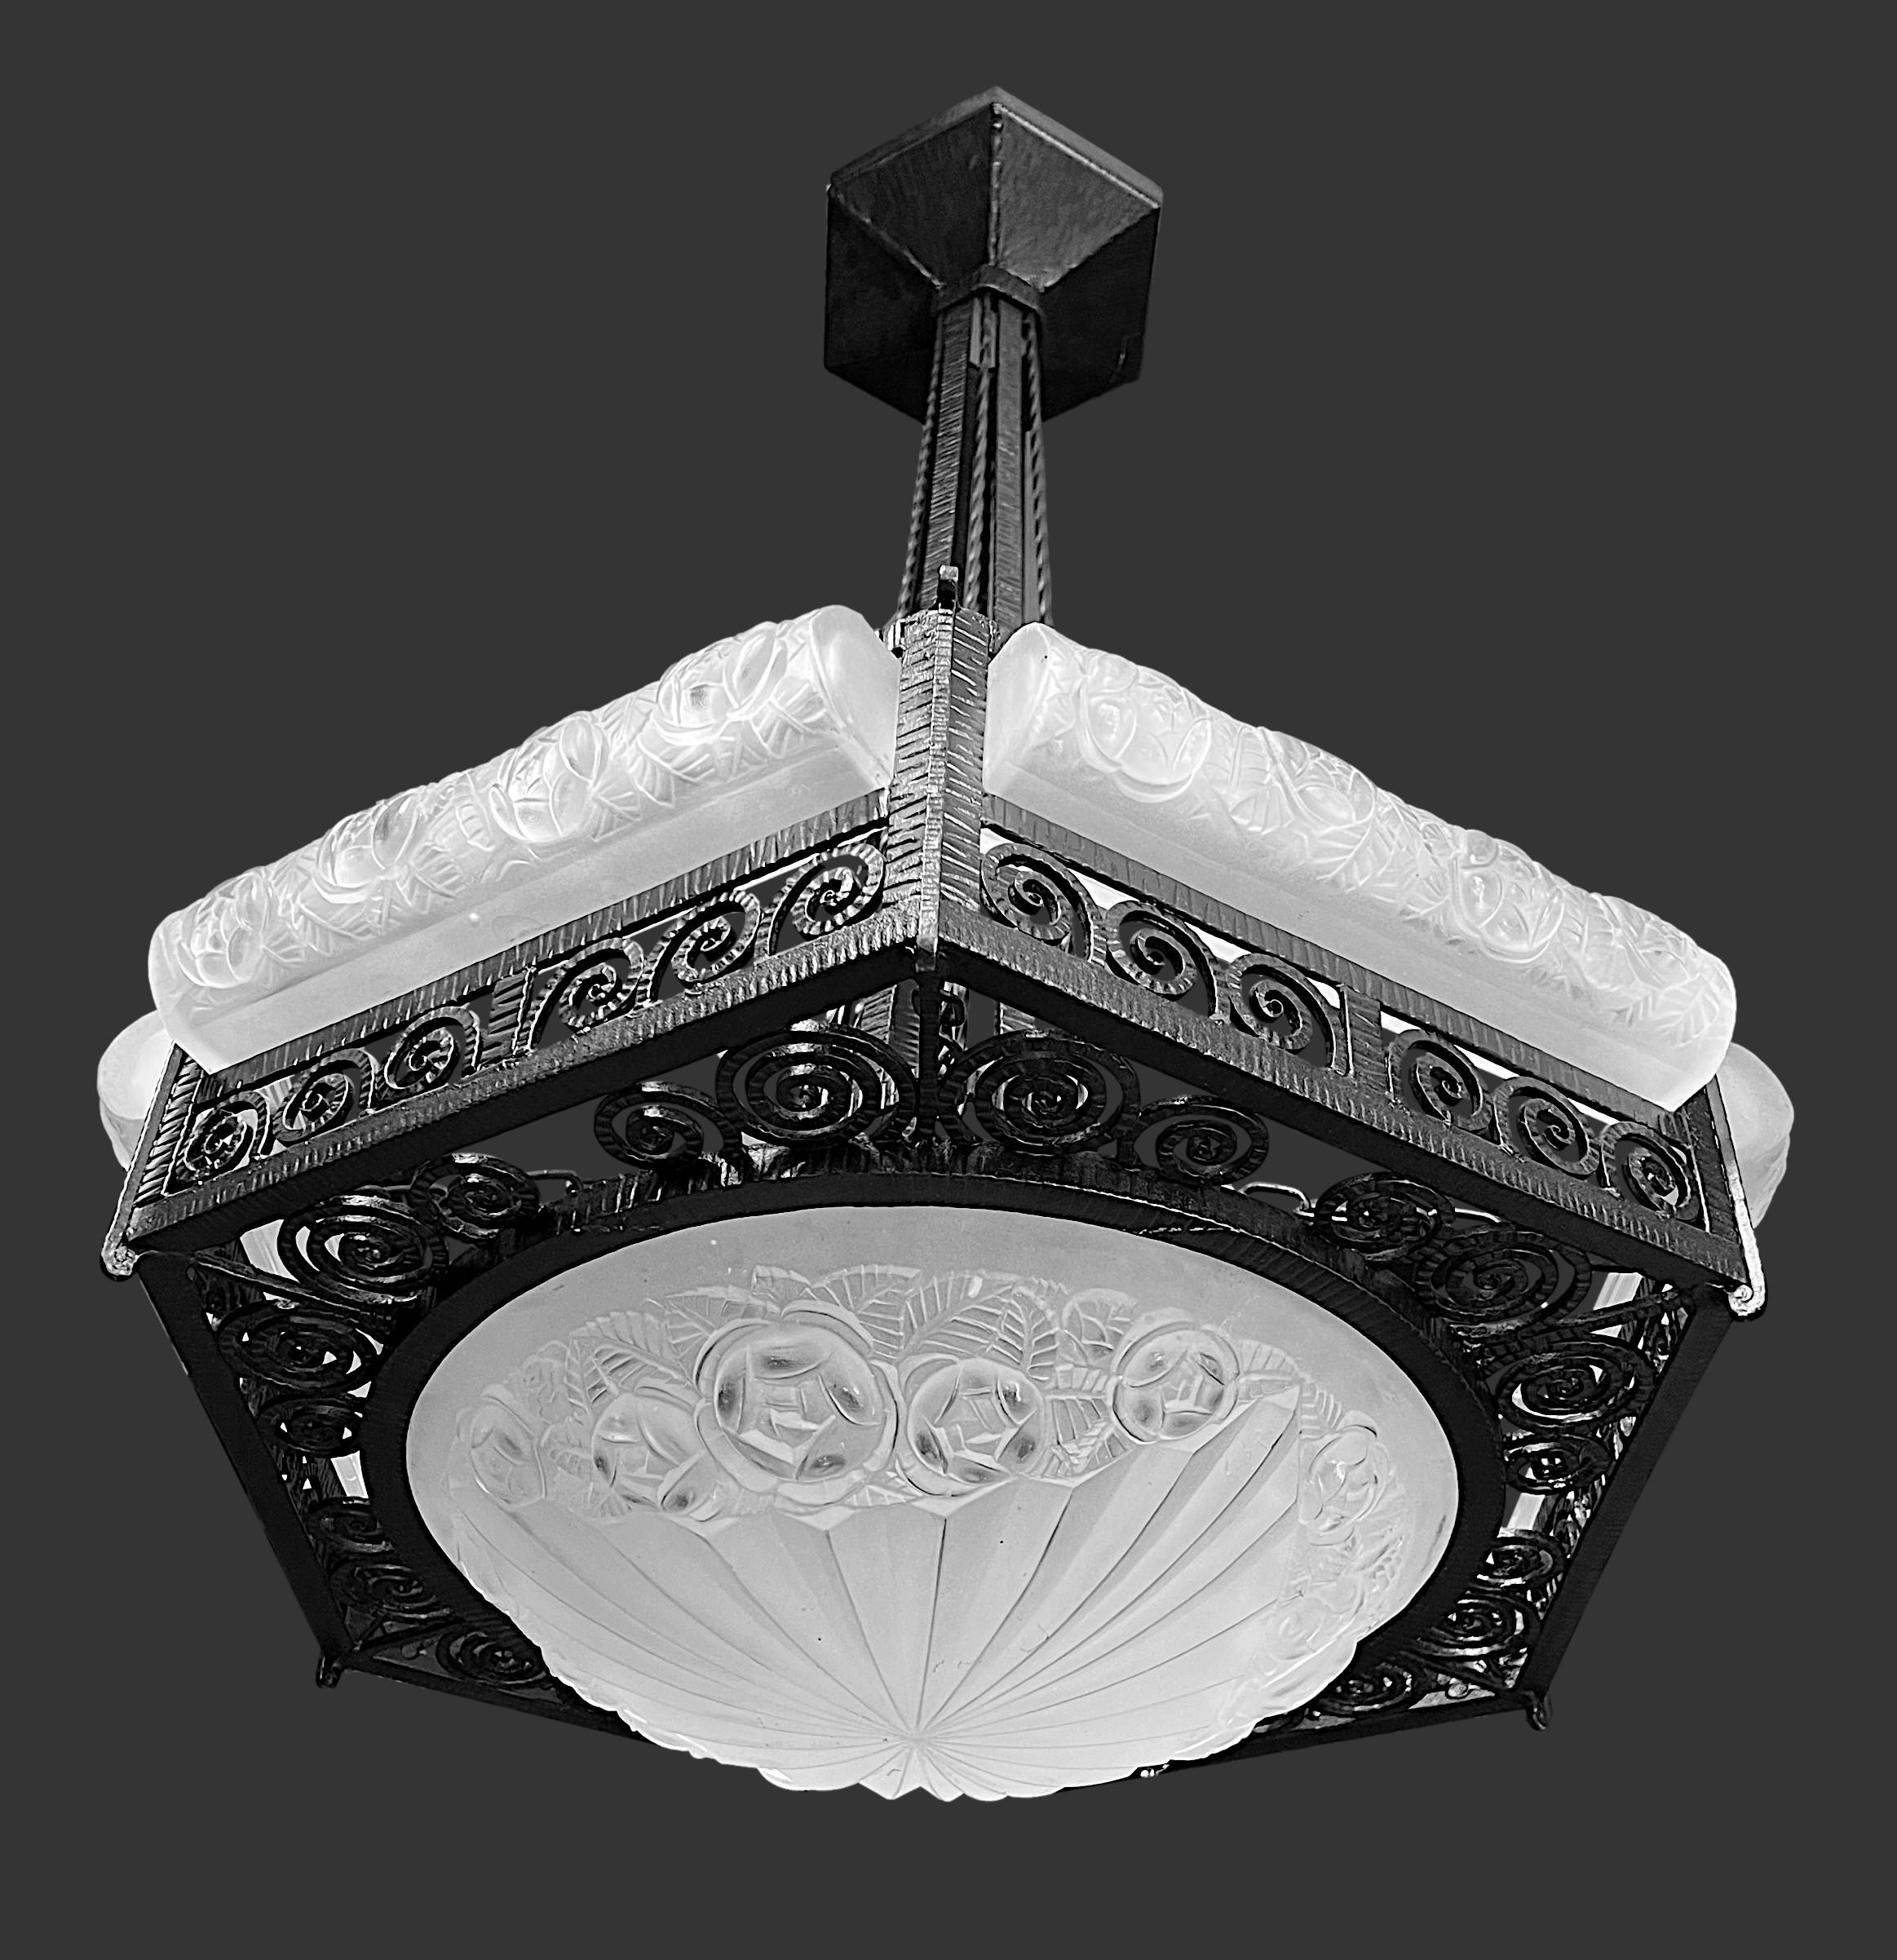 Genuine and large French Art Deco chandelier by DEGUE (Compiegne), France, late 1920s. Original and period chandelier without modification (except wiring). White frosted glass shades with an Art Deco stylized floral pattern. 1 central bowl and 6